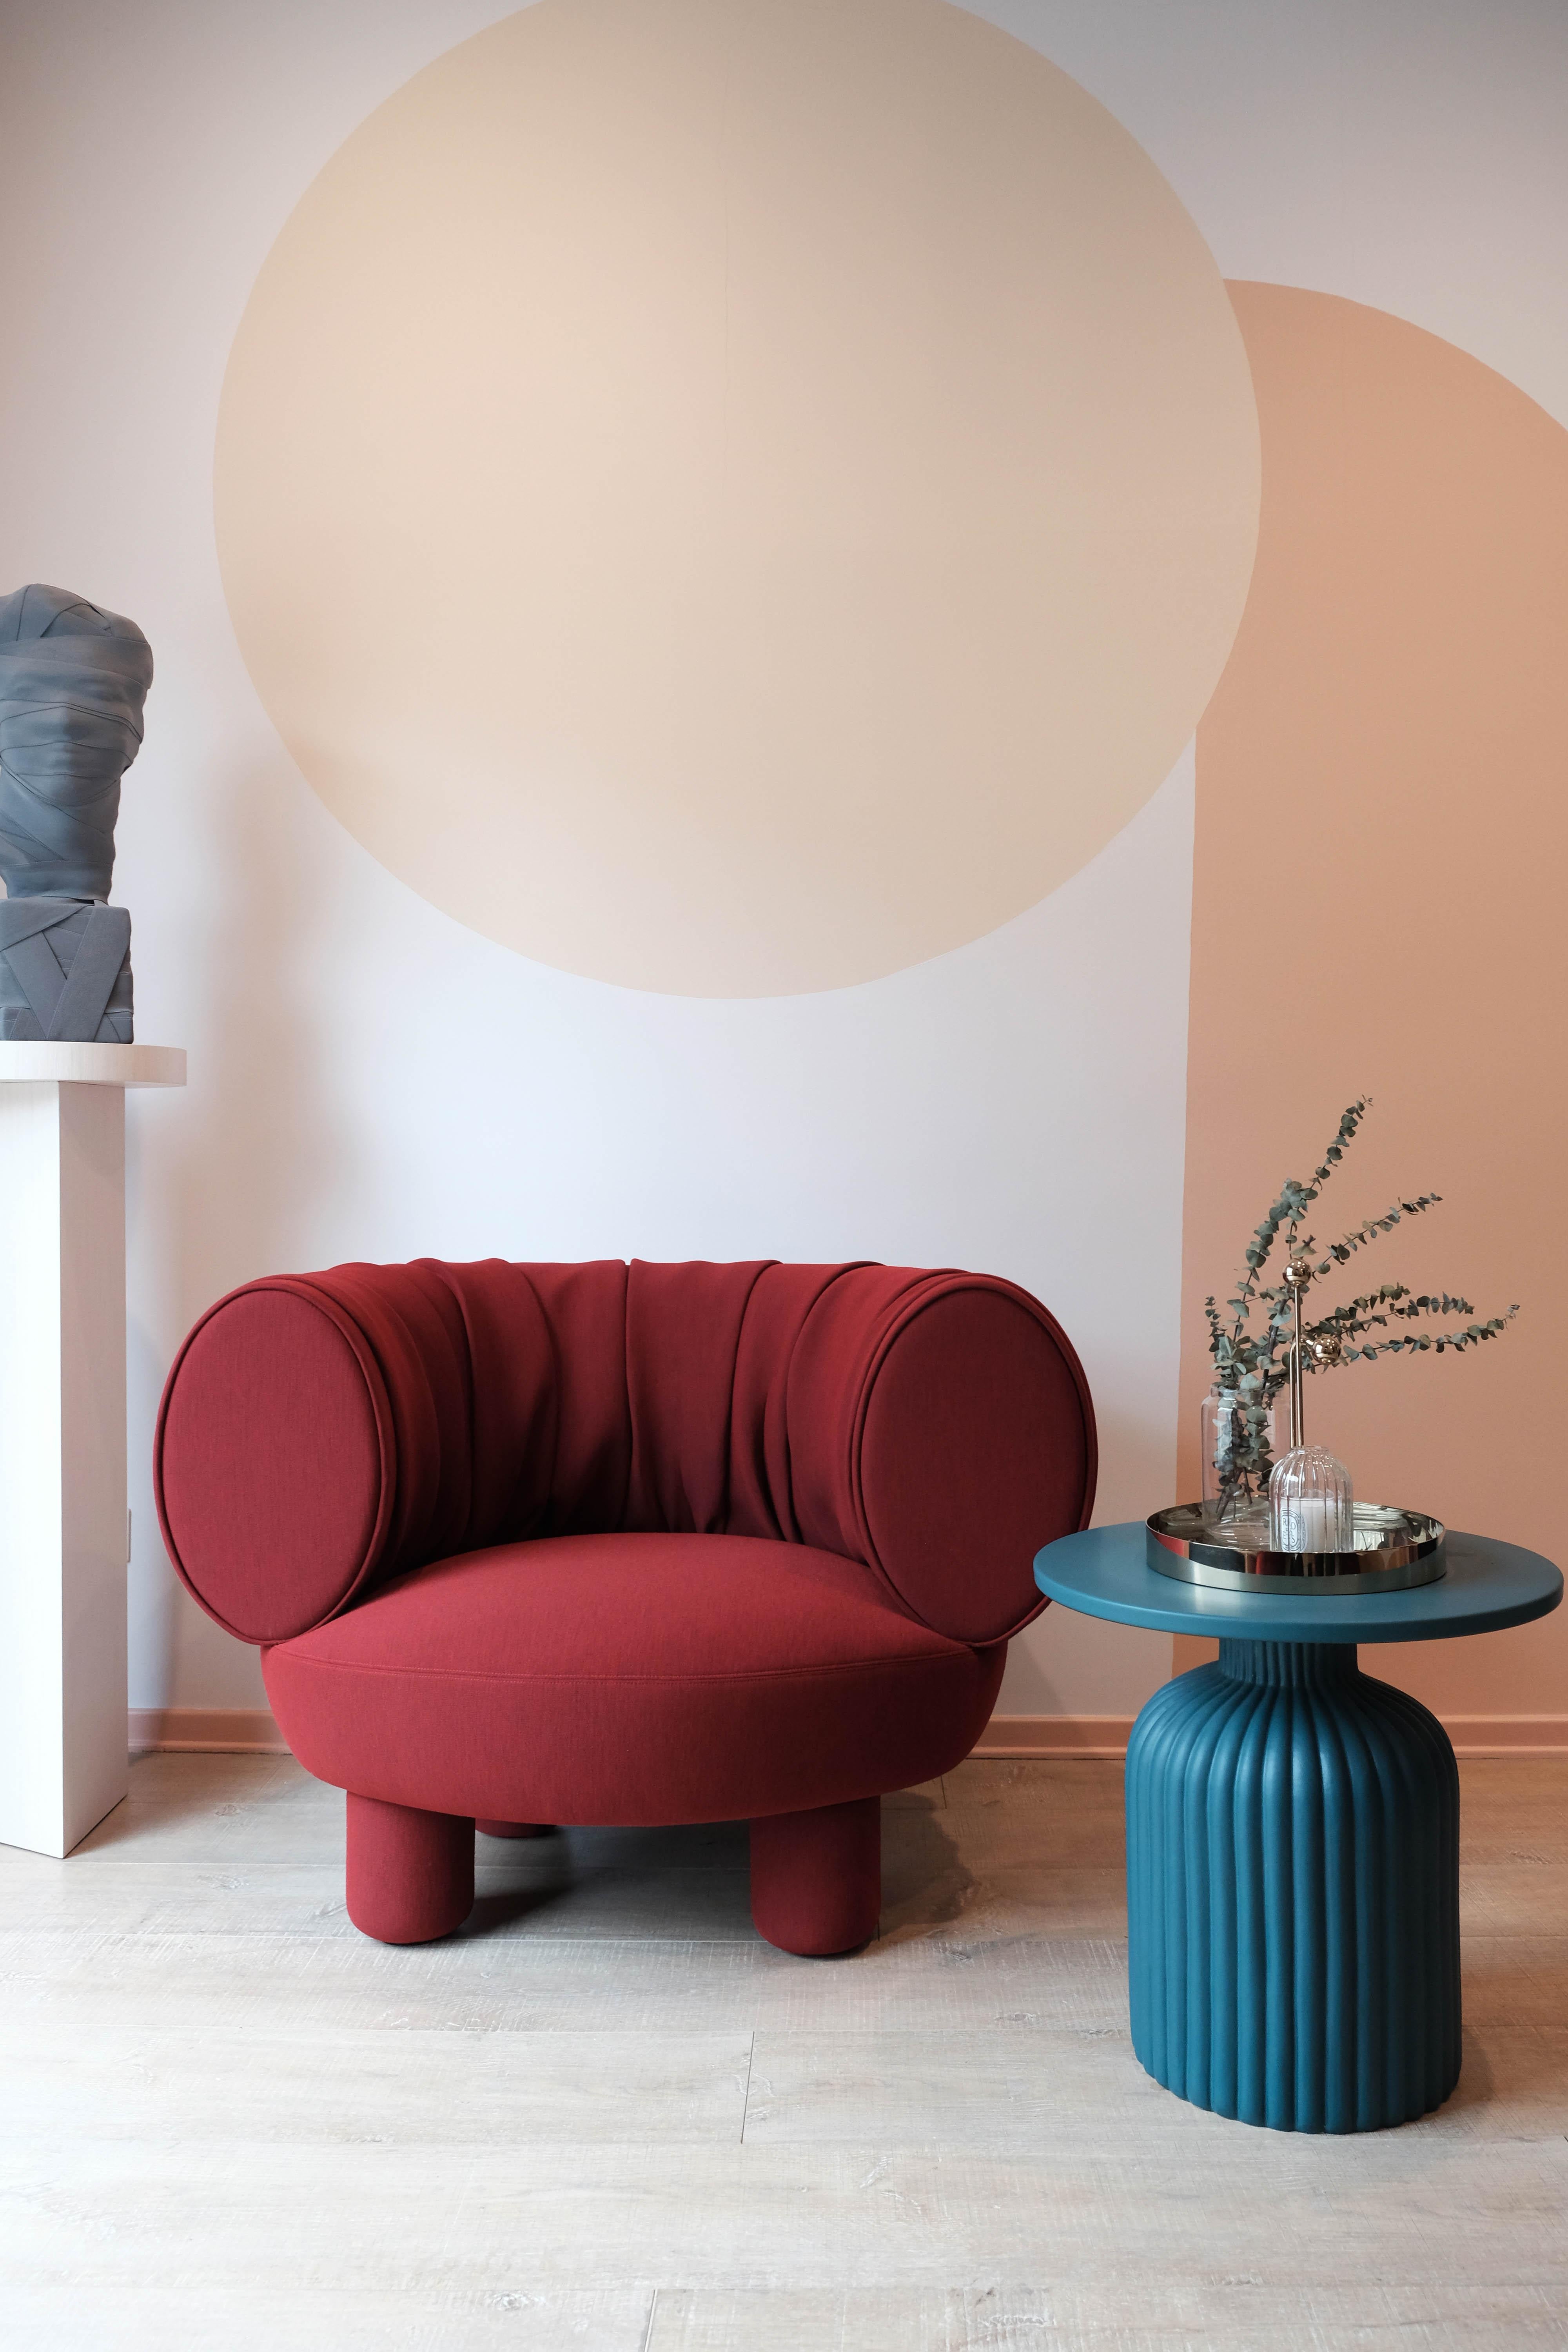 Red sofa designed by Thomas Dariel, Maison Dada
L 113 x D 80 x H 80cm
Structure in solid timber and plywood
Memory Foam
Legs and seating fully upholstered in fabric
Recommended fabric • Febrik Uniform Melange Collection from Kvadrat
Other fabric